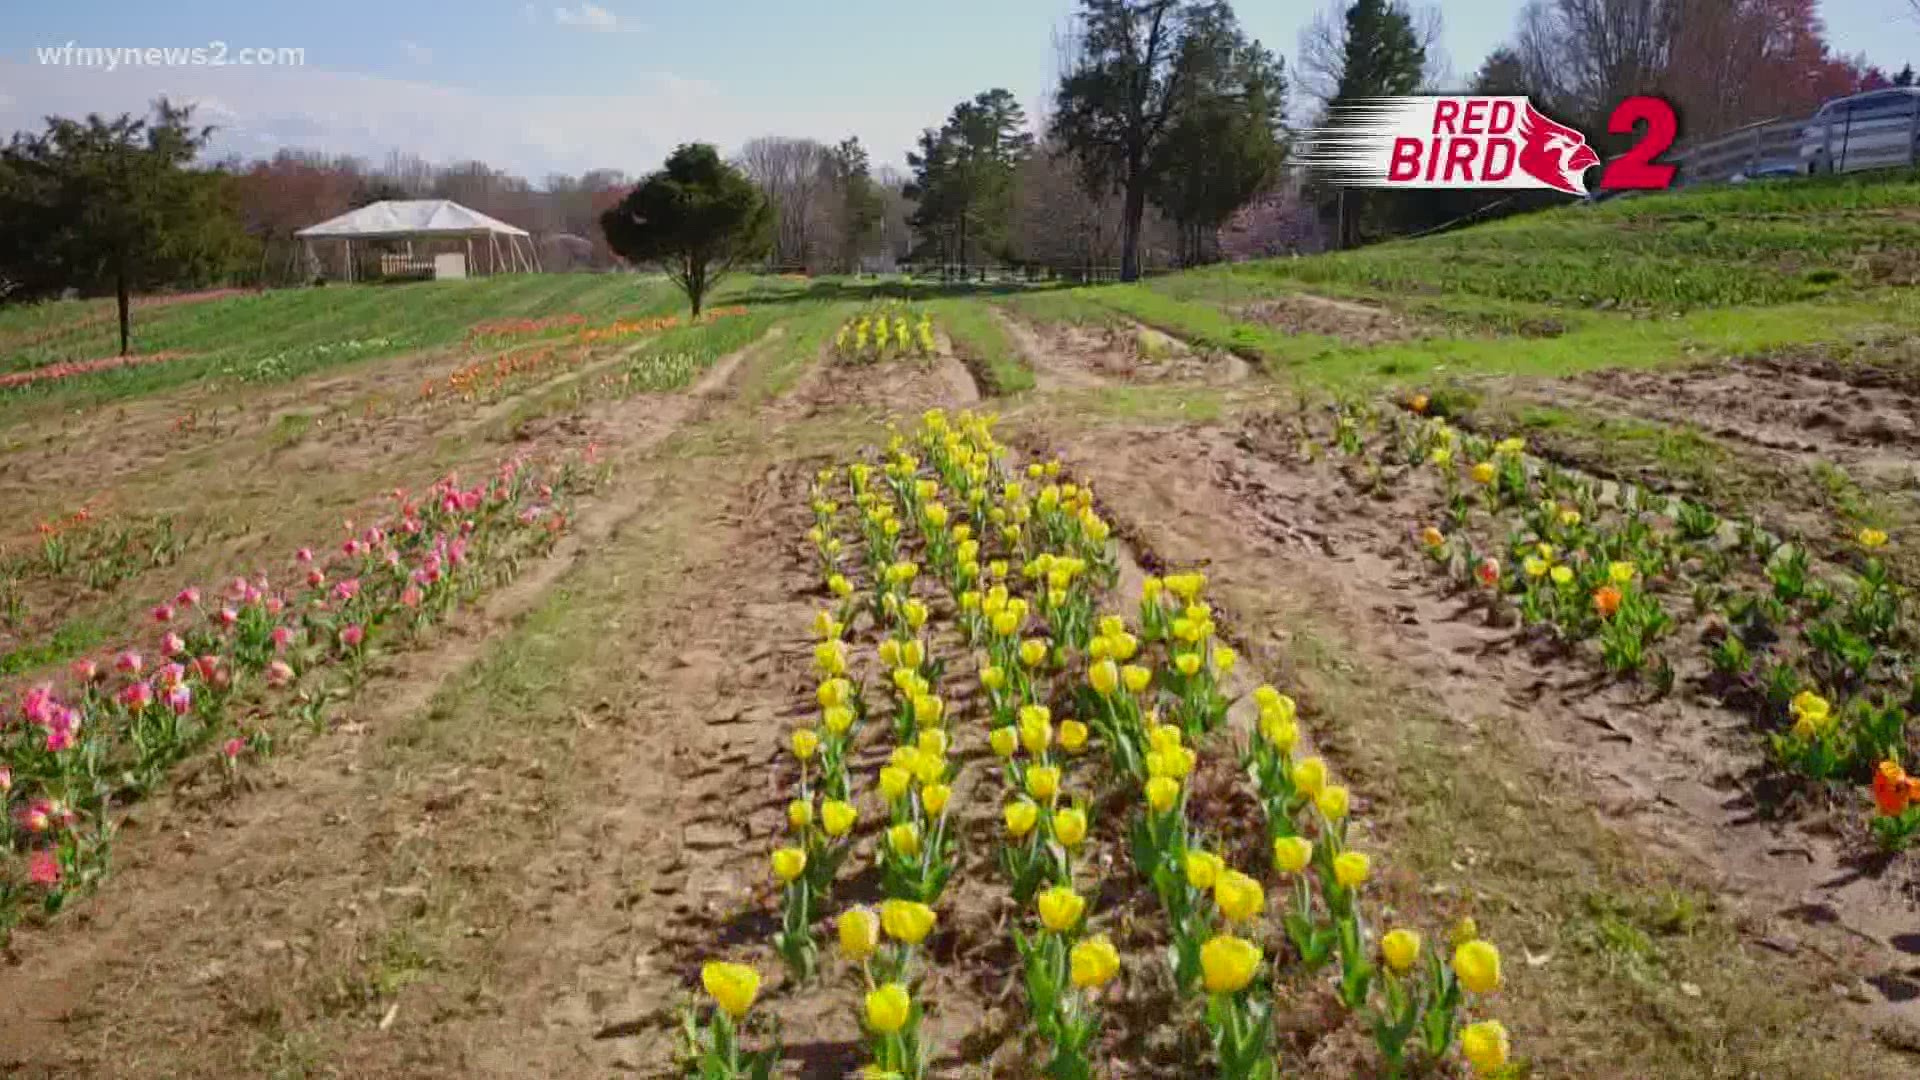 Farmers shared insight on the spring season as families picked tulips to decorate their homes.